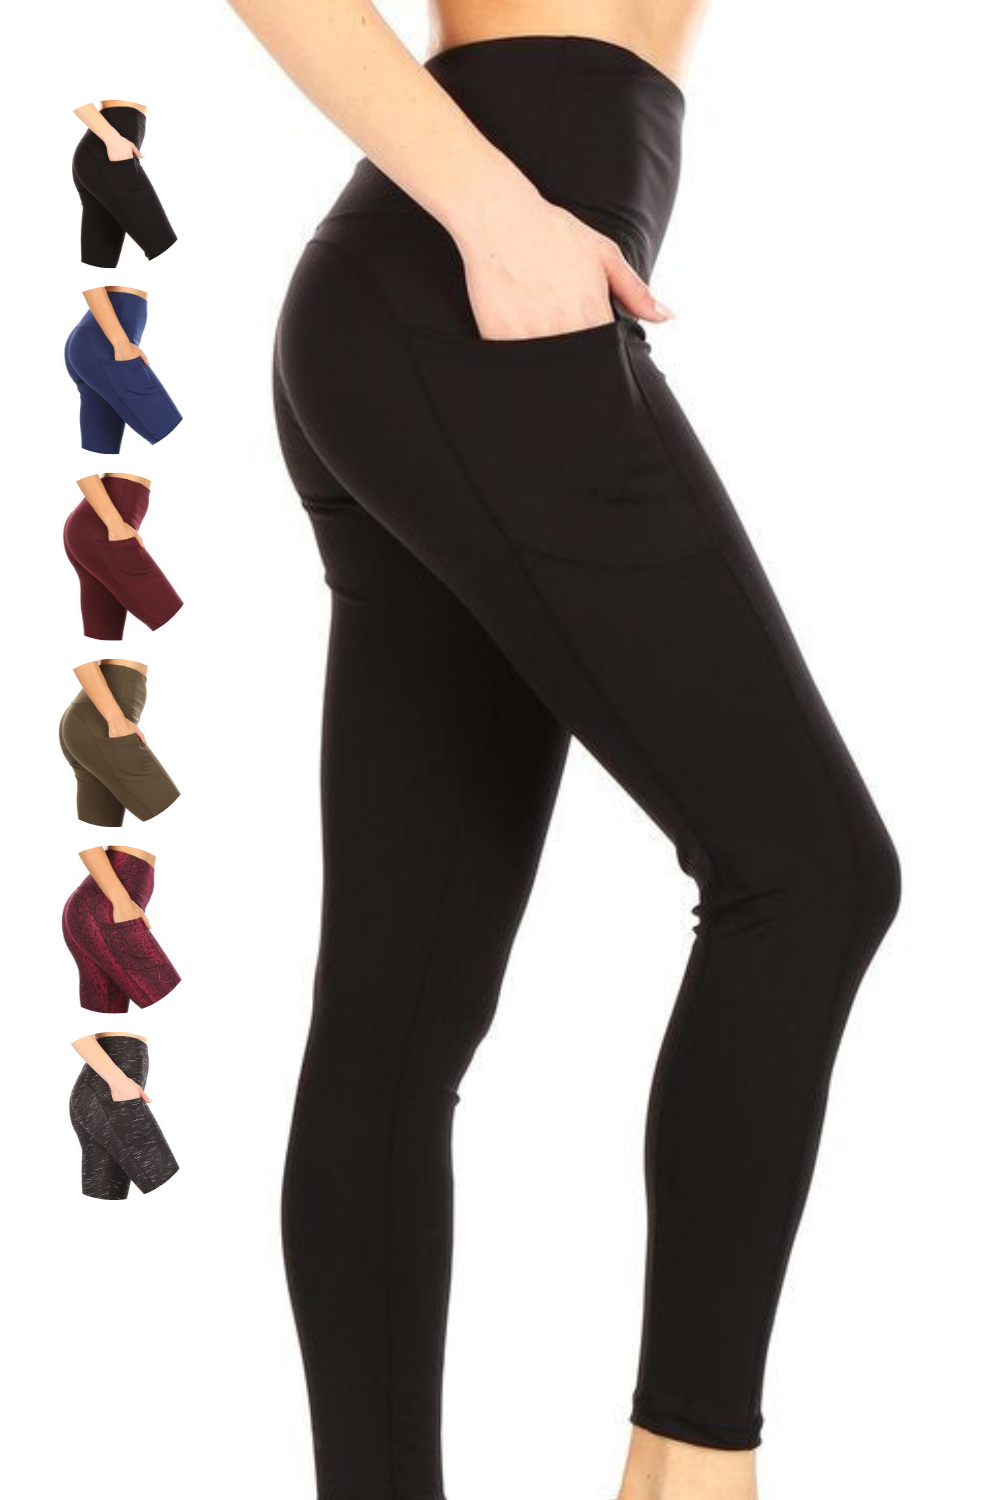 Athleisure Sculpting Leggings with Pockets